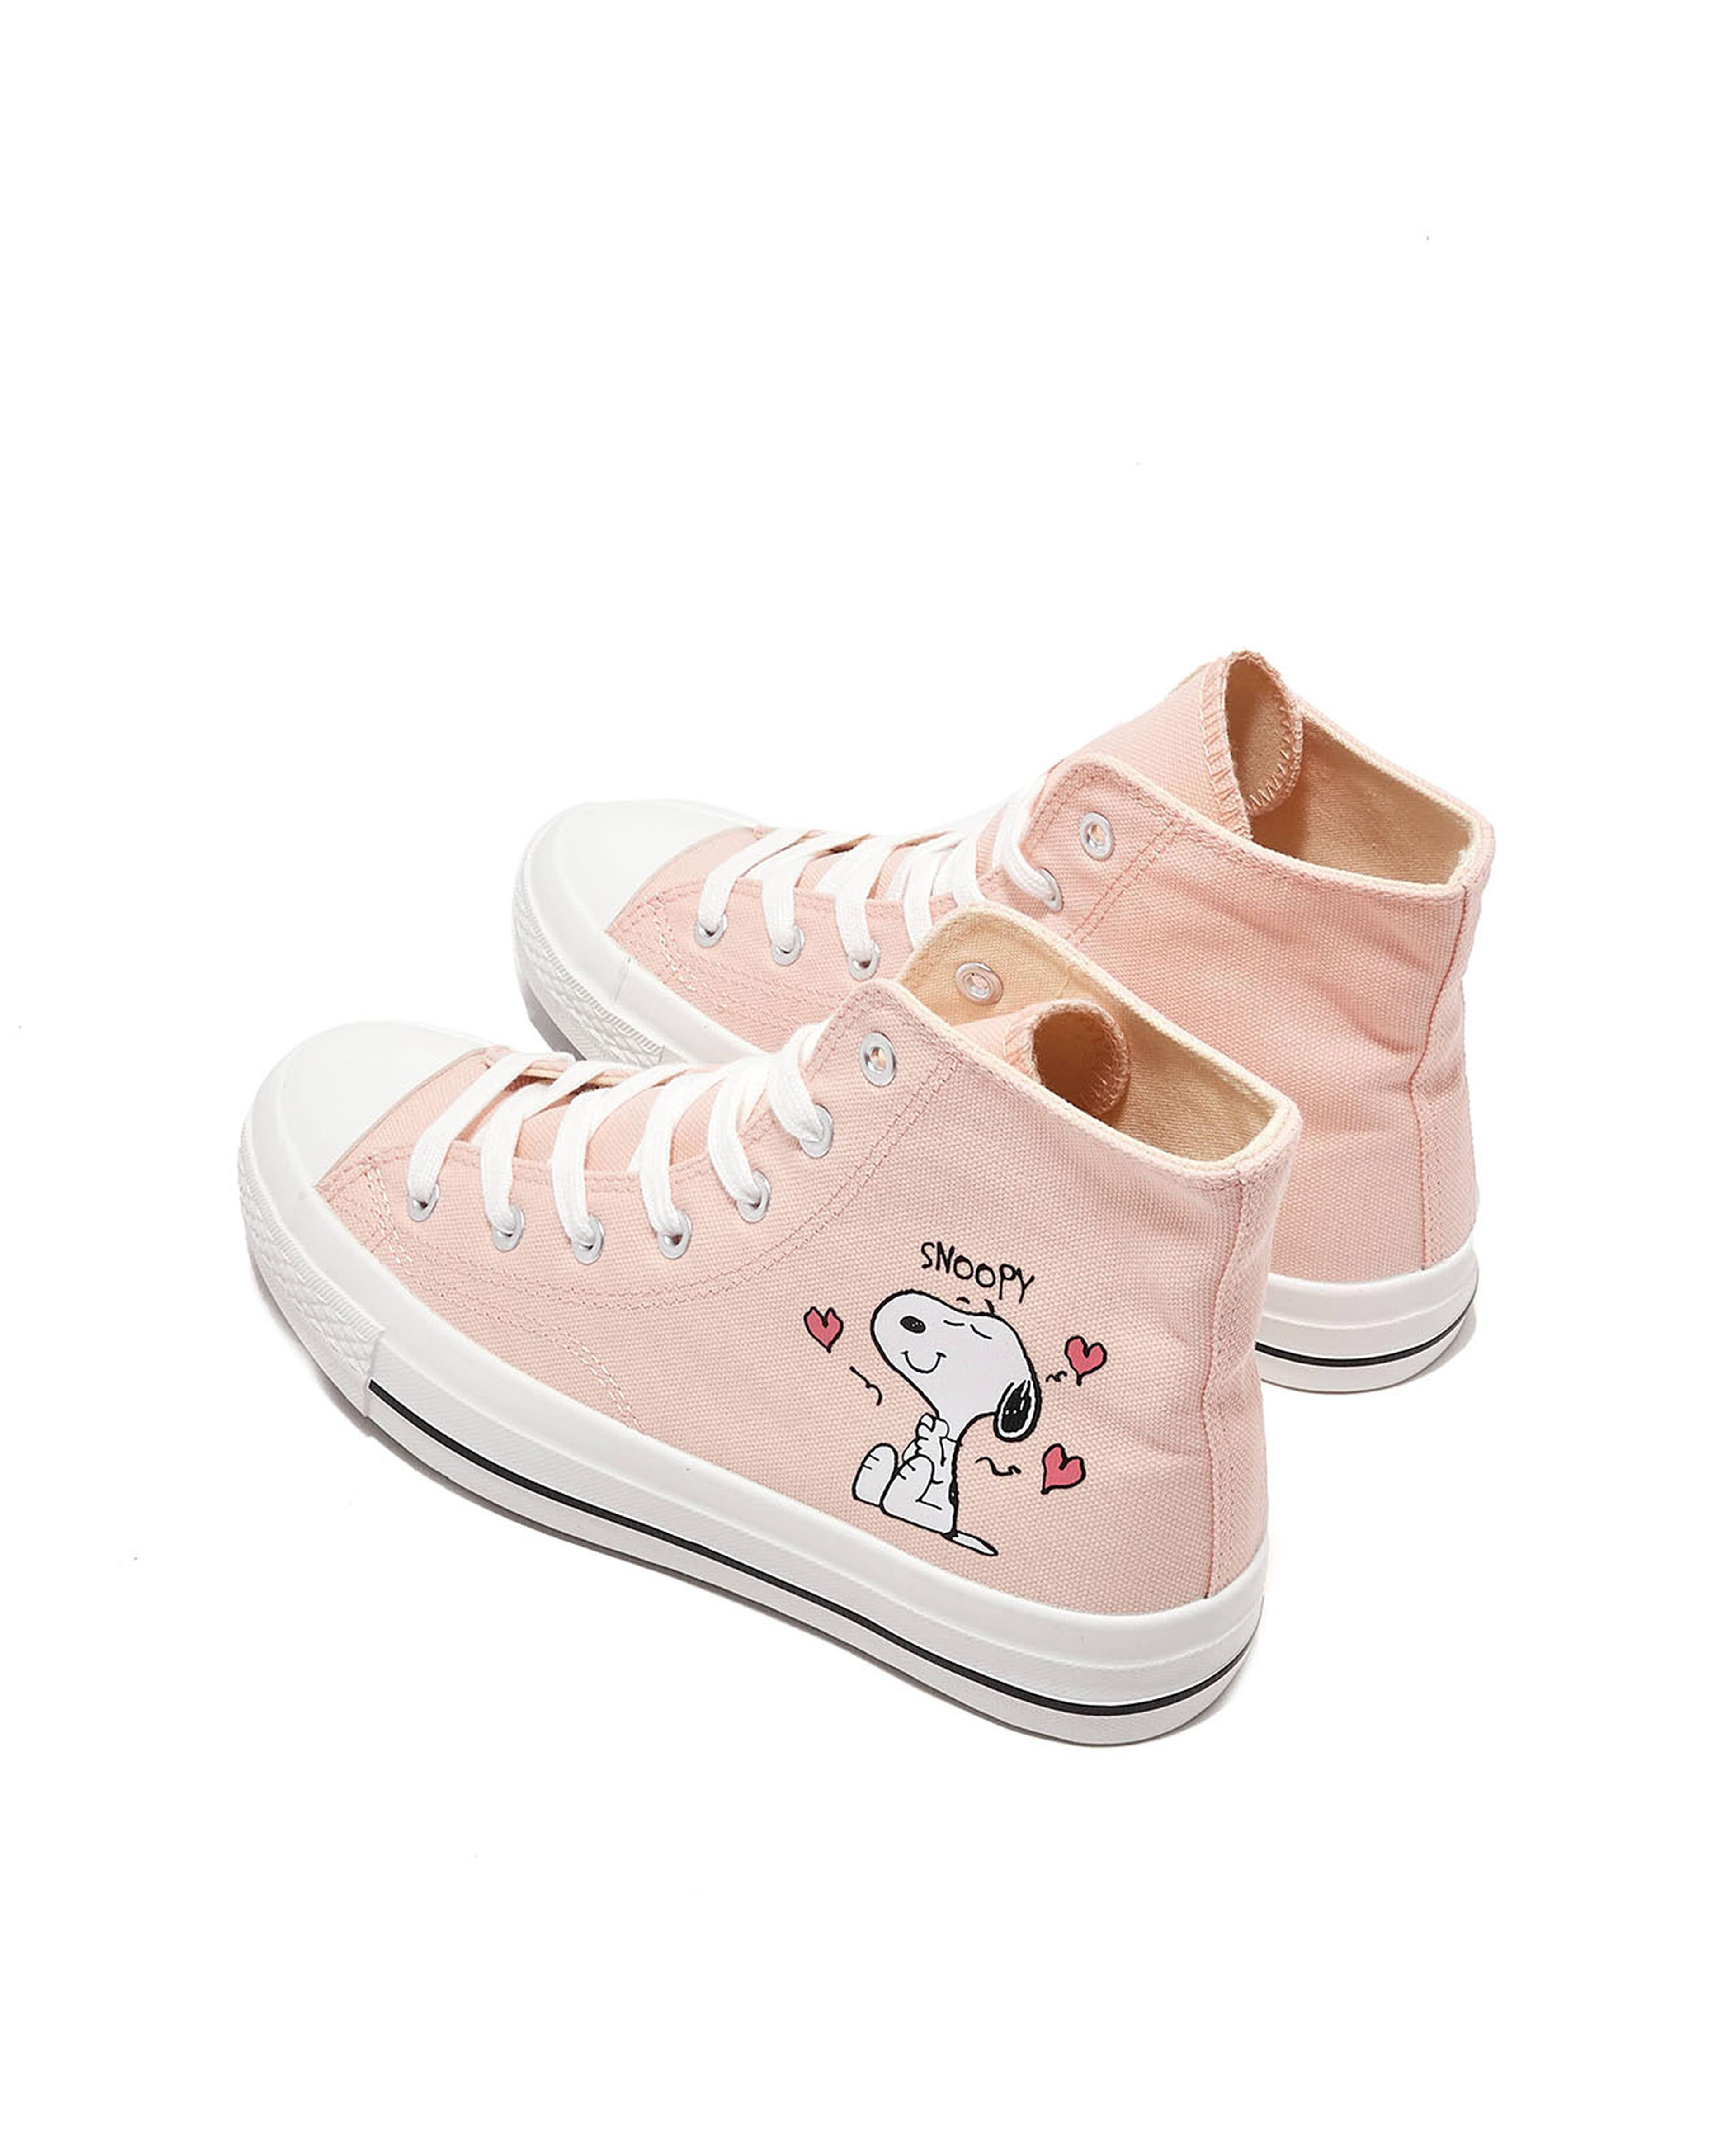 Snoopy Print High Top Canvas Shoes